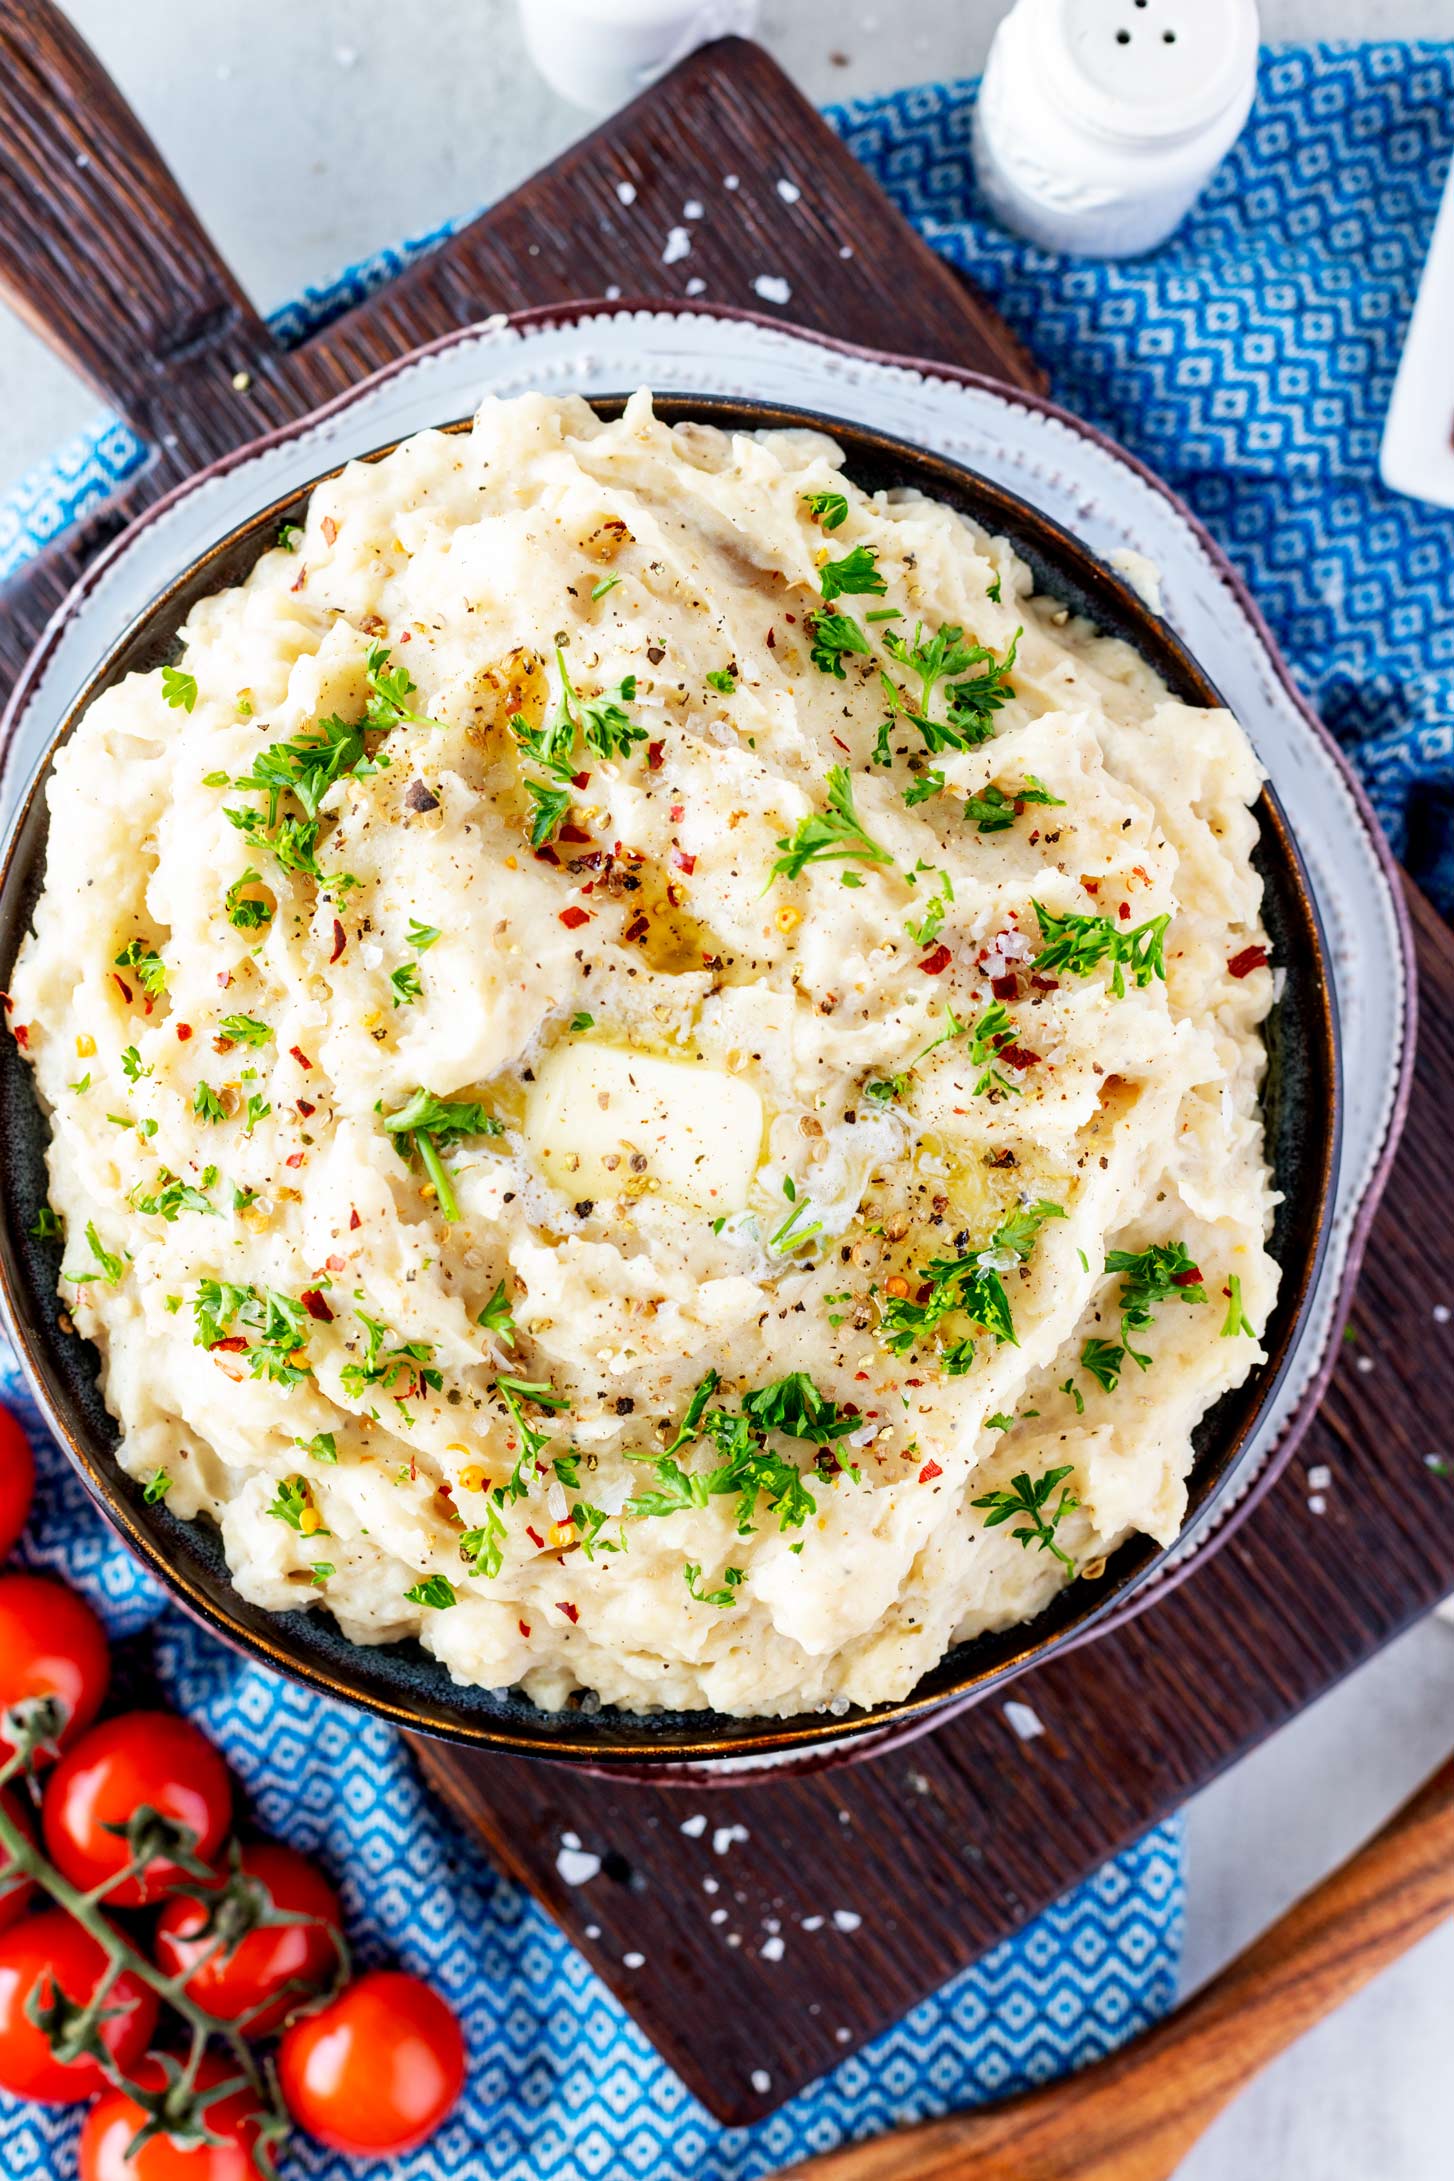 Overhead photo of a bowl of mashed potatoes garnished with parsley, flaky salt,and crushed red pepper flakes.